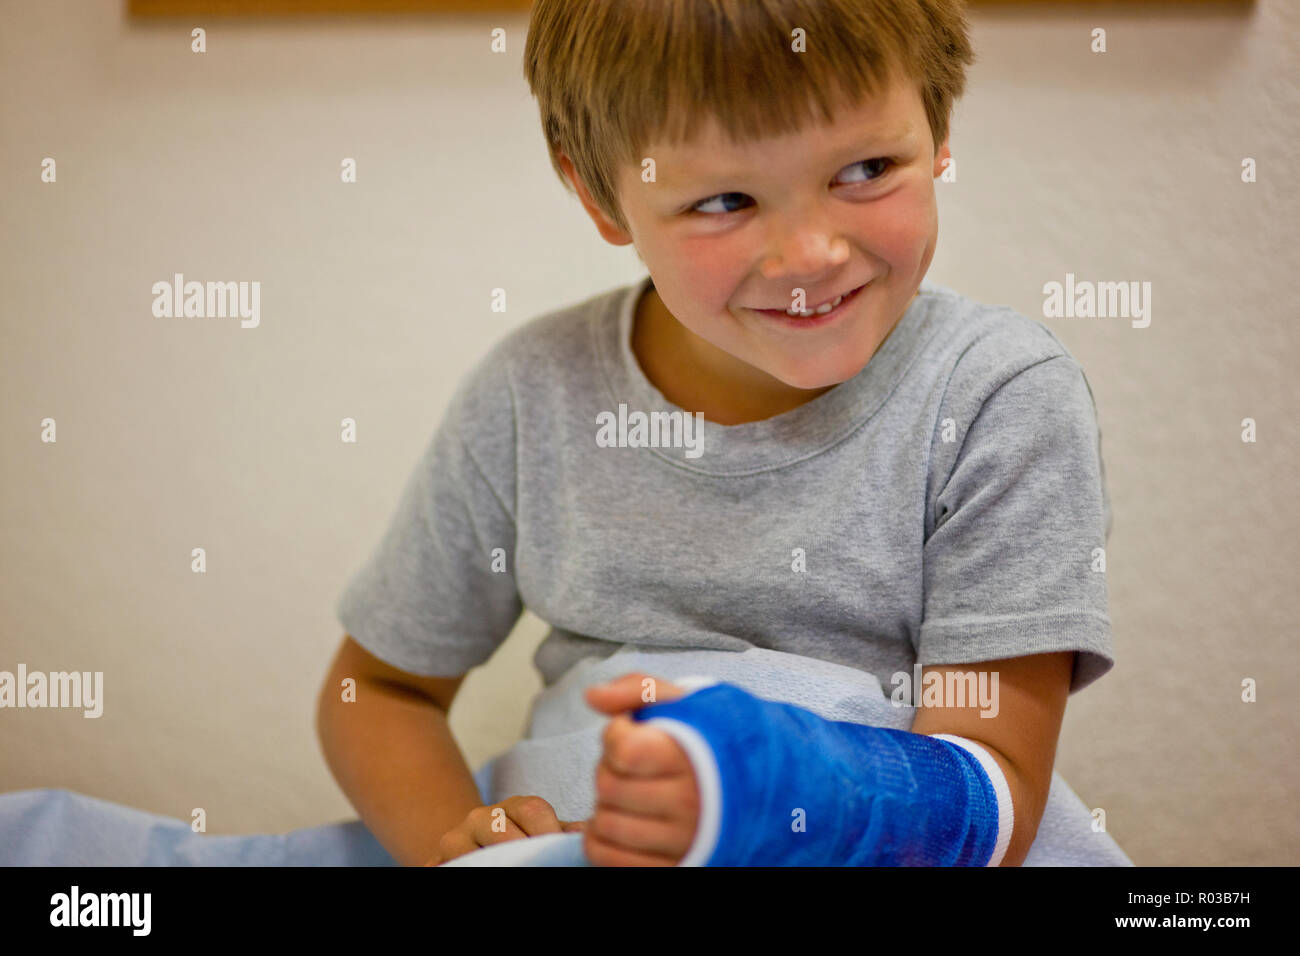 Young boy with a cast on his arm sitting in a doctor's office. Stock Photo